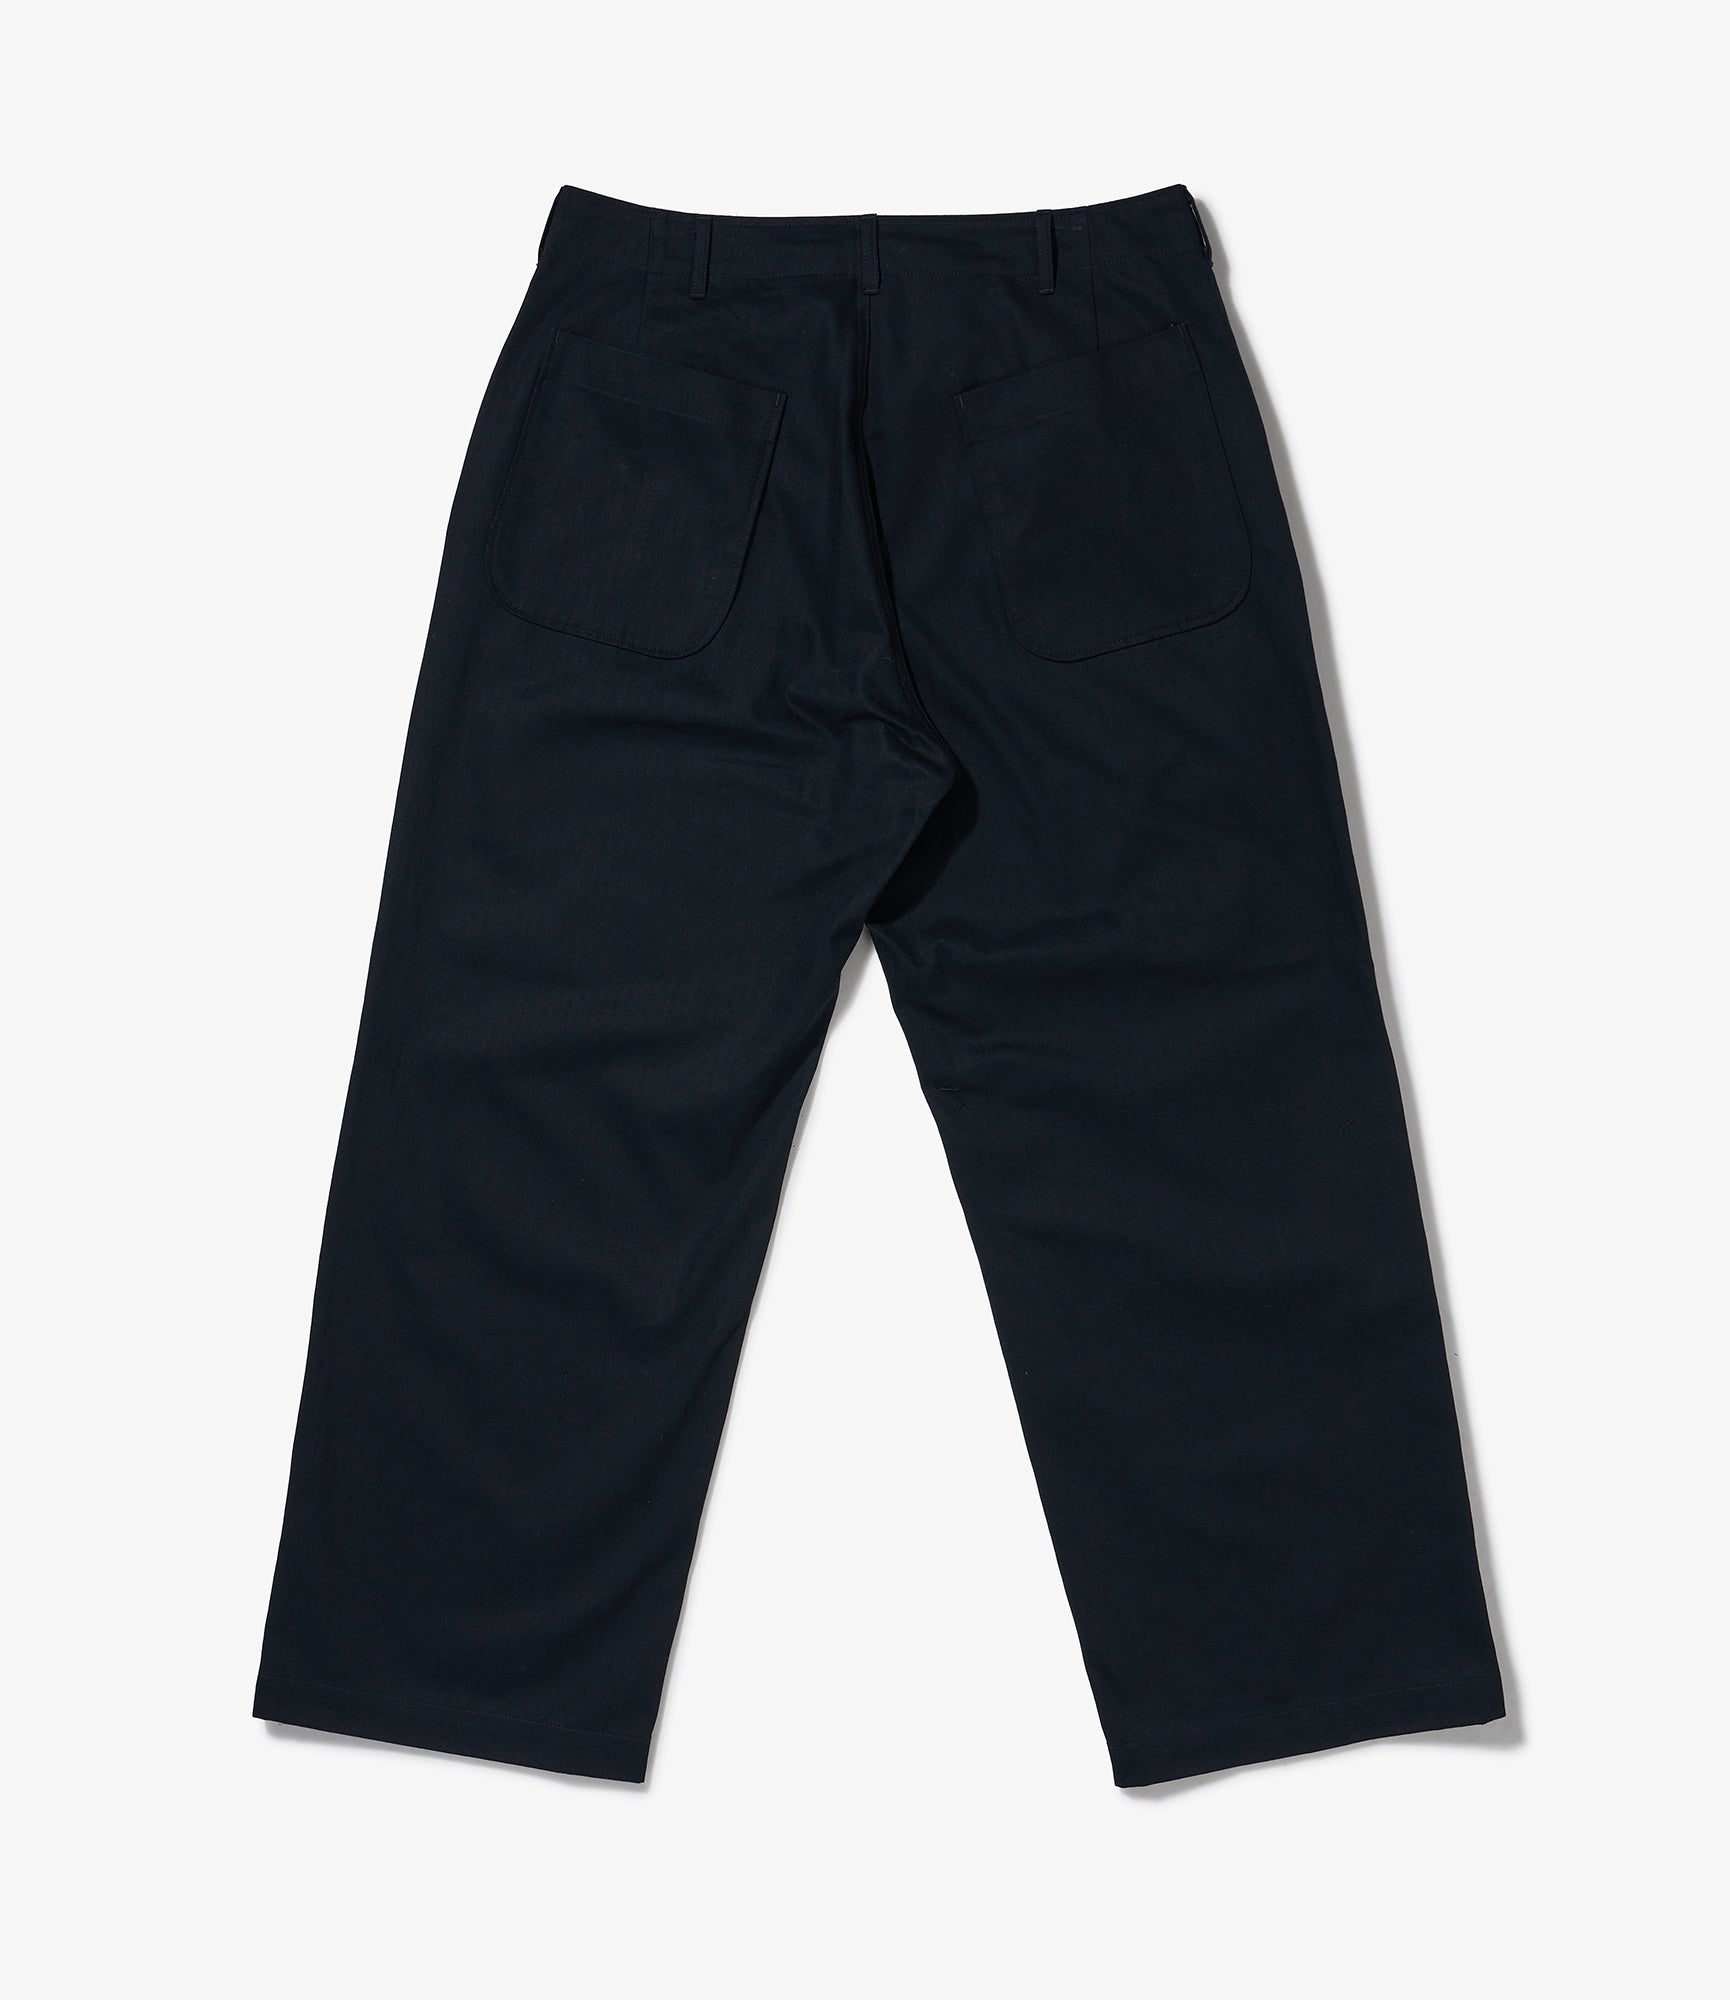 Nepenthes Special - Sailor Pant -  Black Cotton Herringbone Twill